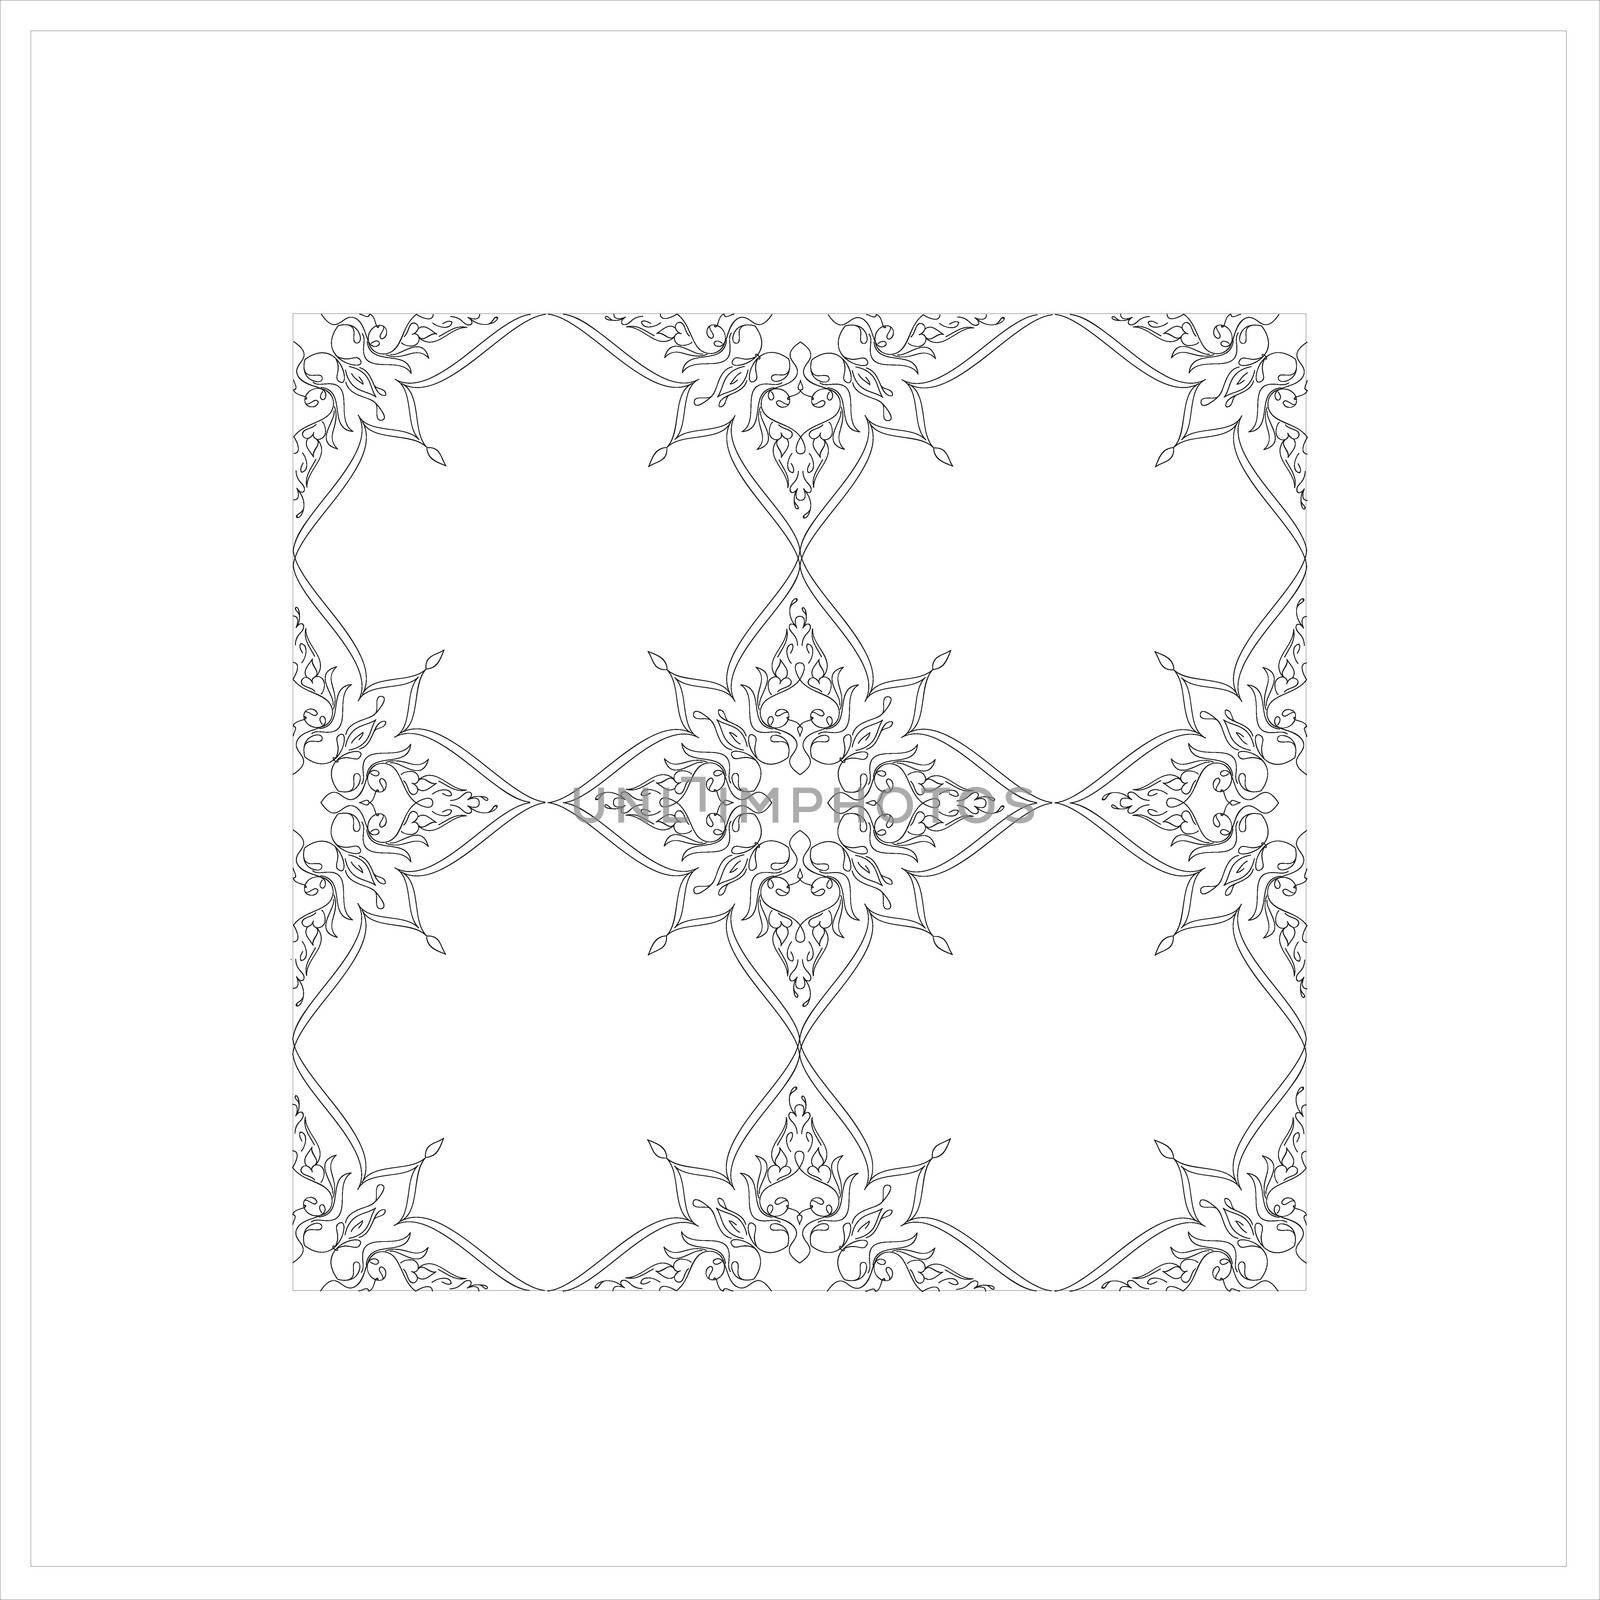 Ottoman Tile Art With  Islamic Elements without colour square by mturhanlar